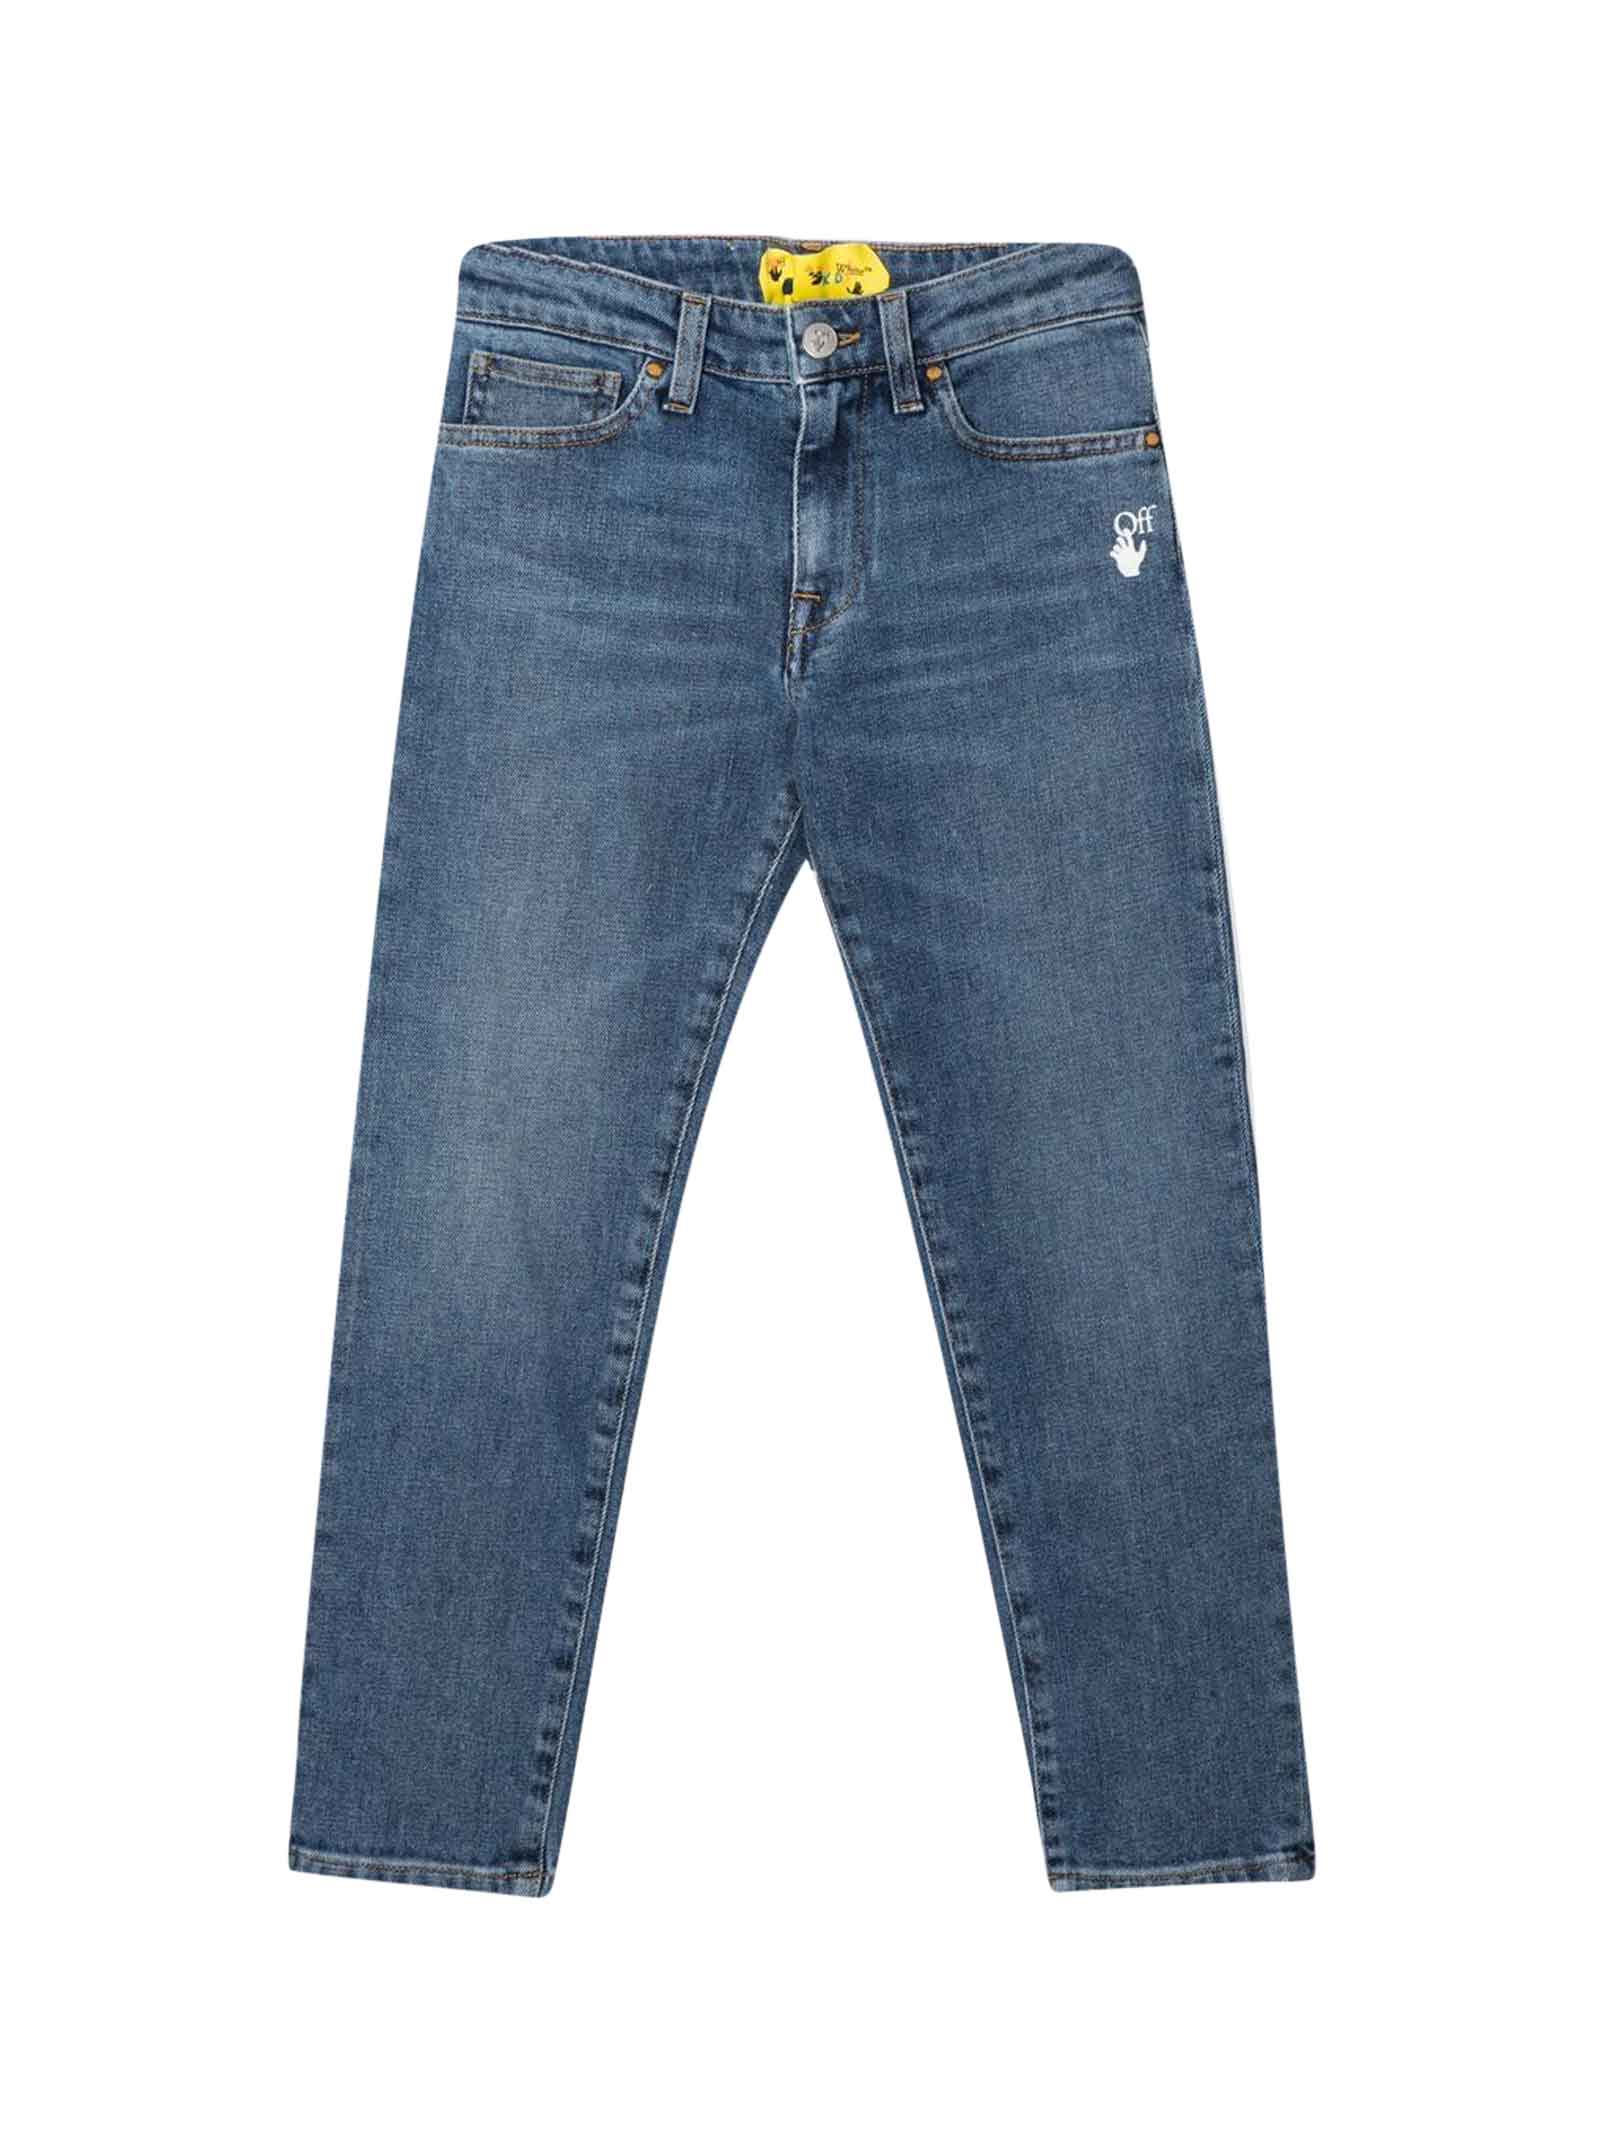 Off-White Blue Jeans